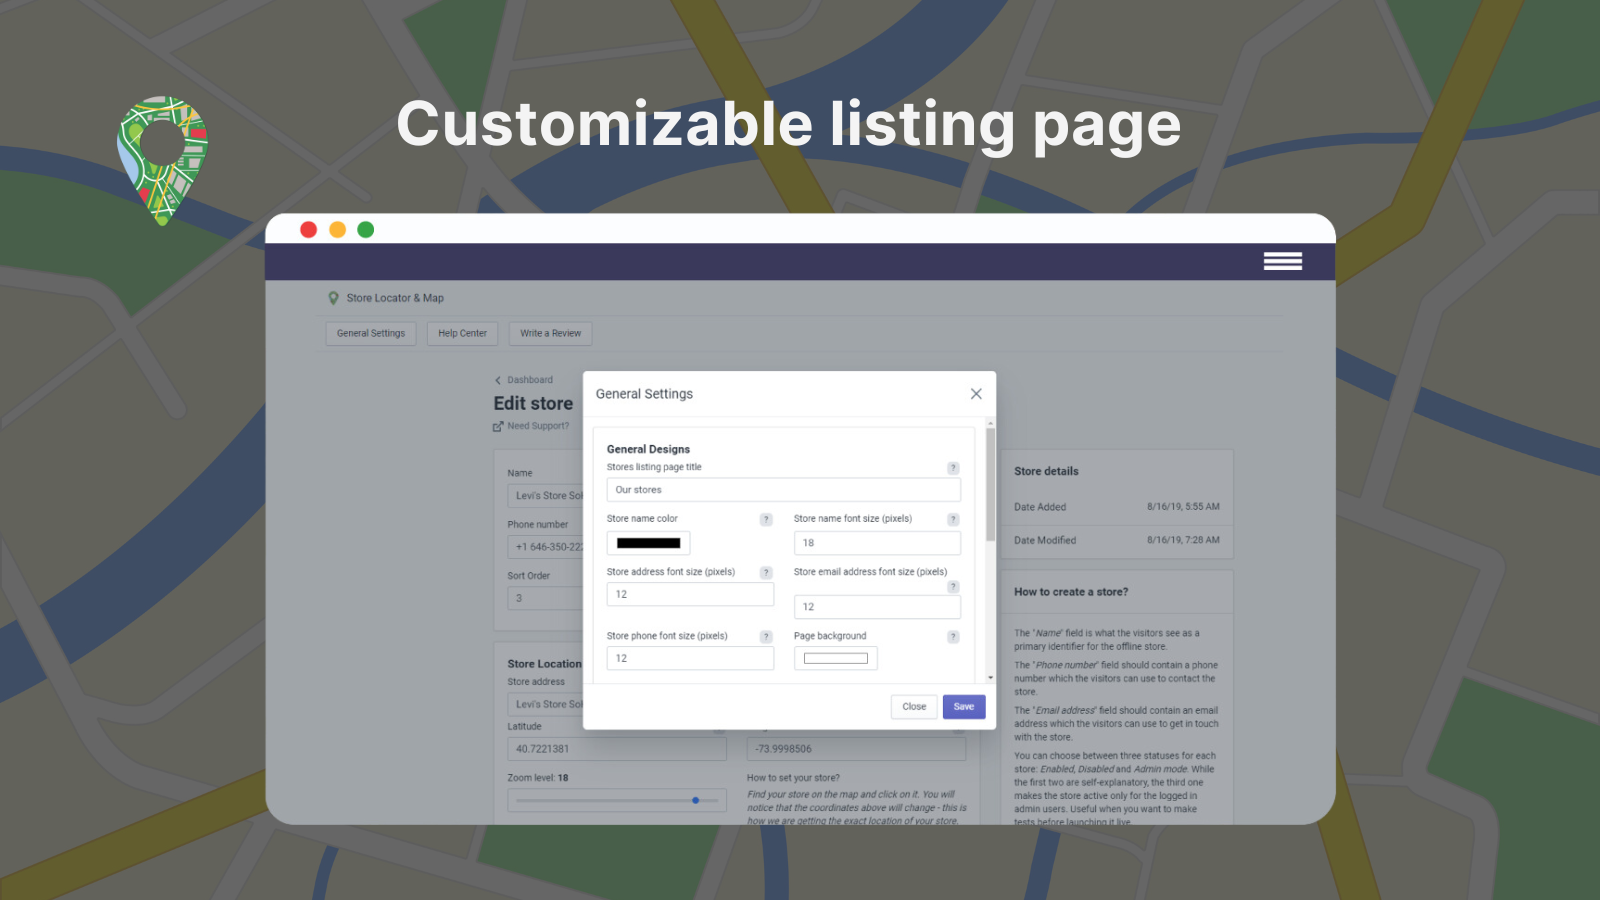 Customizable listing page - fonts, colors, map styles